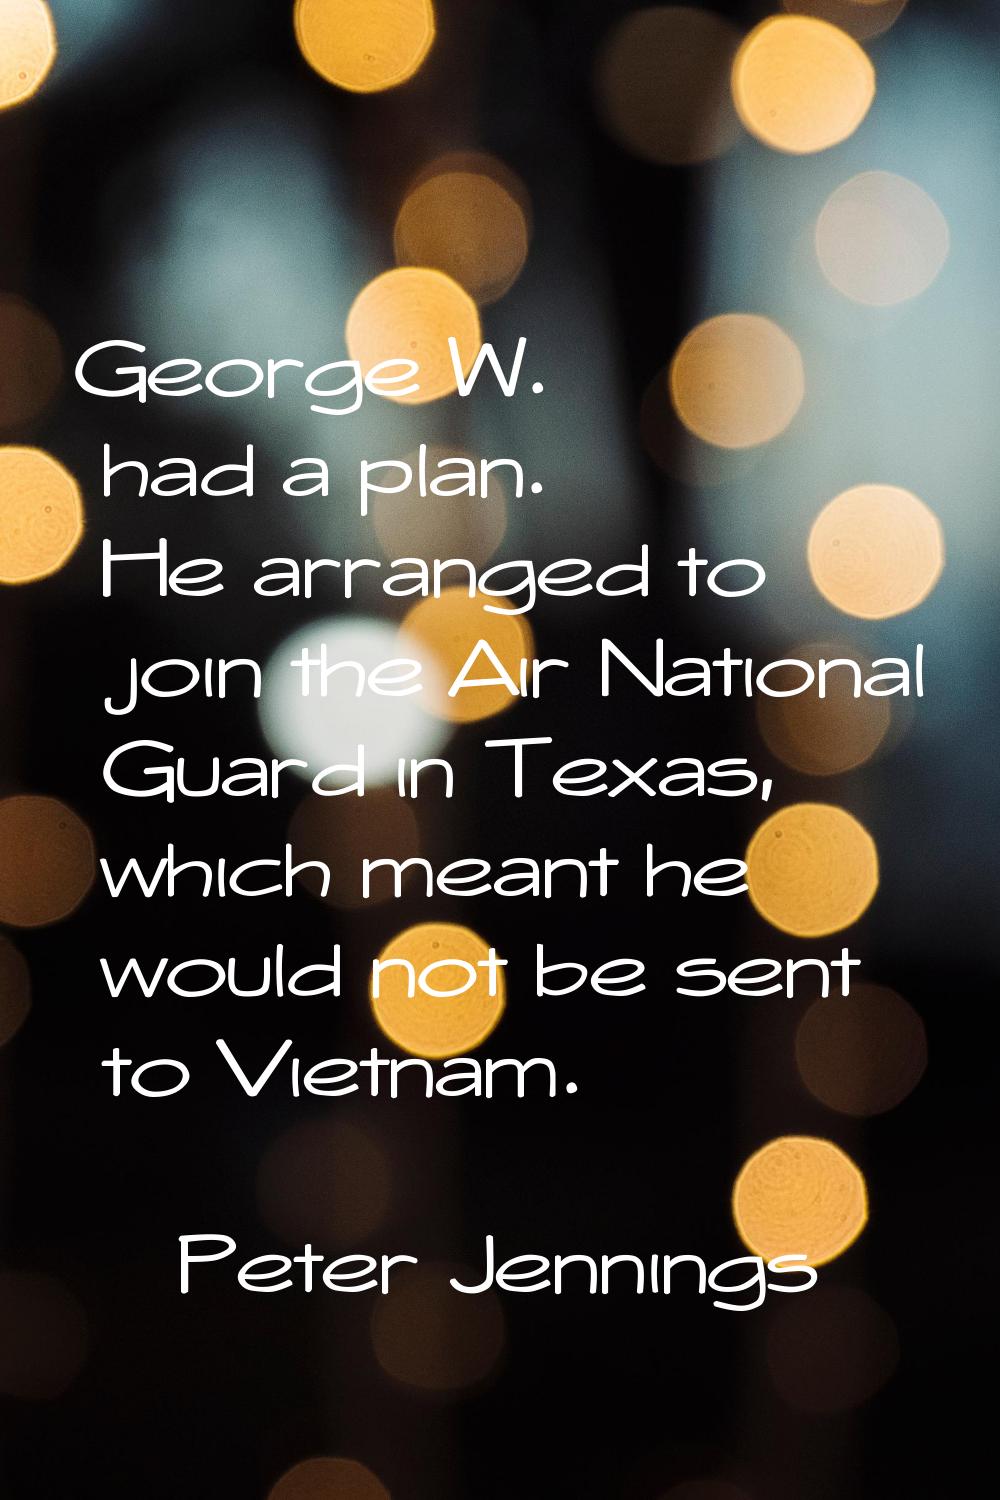 George W. had a plan. He arranged to join the Air National Guard in Texas, which meant he would not